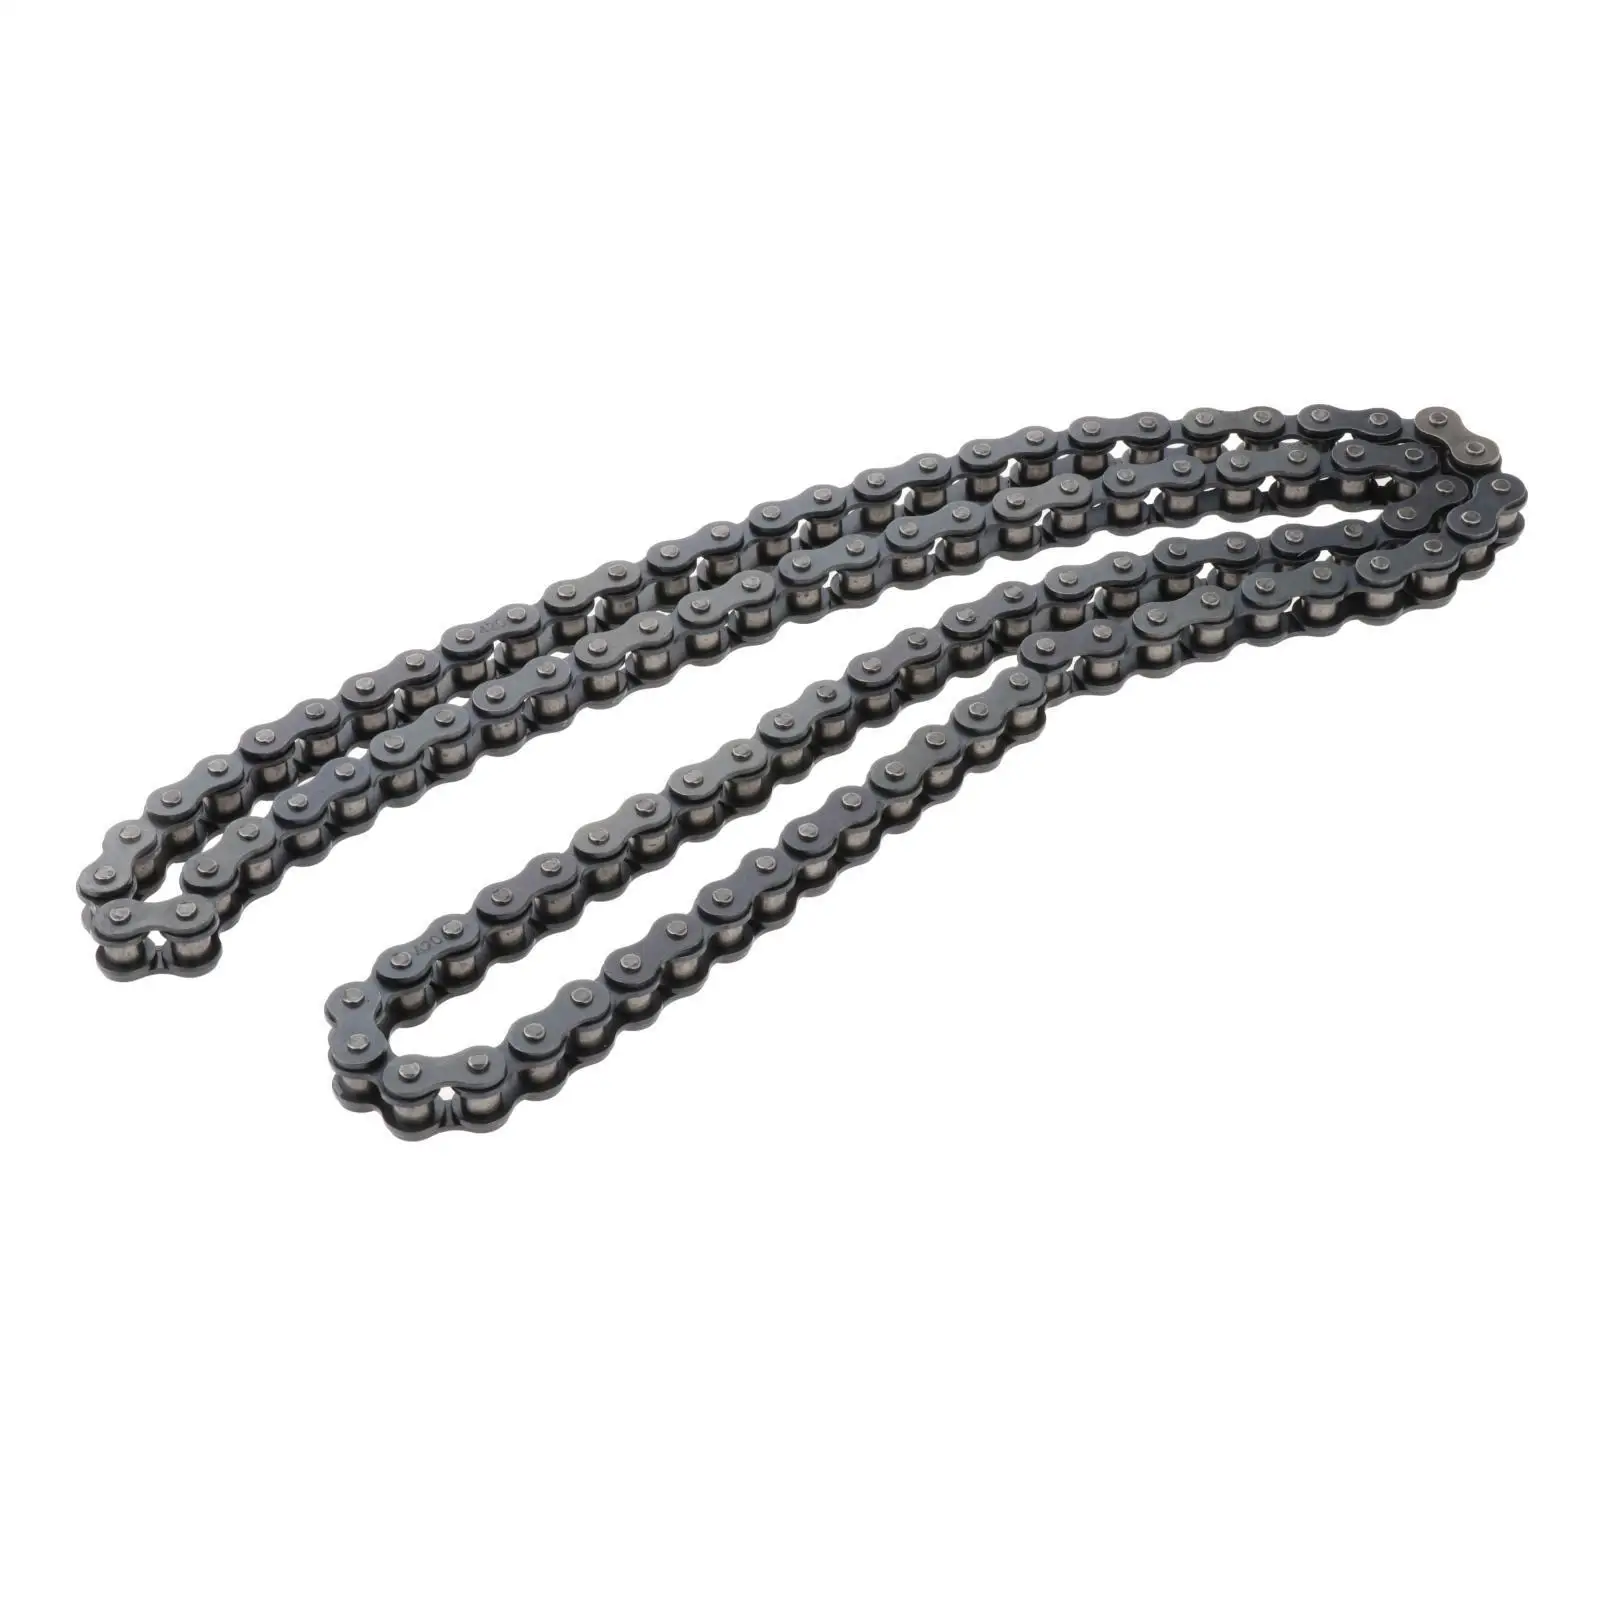 420 Motorcycle Chain 50-110Cc Accessory Drive Chain Chain Roller Motorcycle Chain for Mini Bike Off-Road Motorcycle Bike